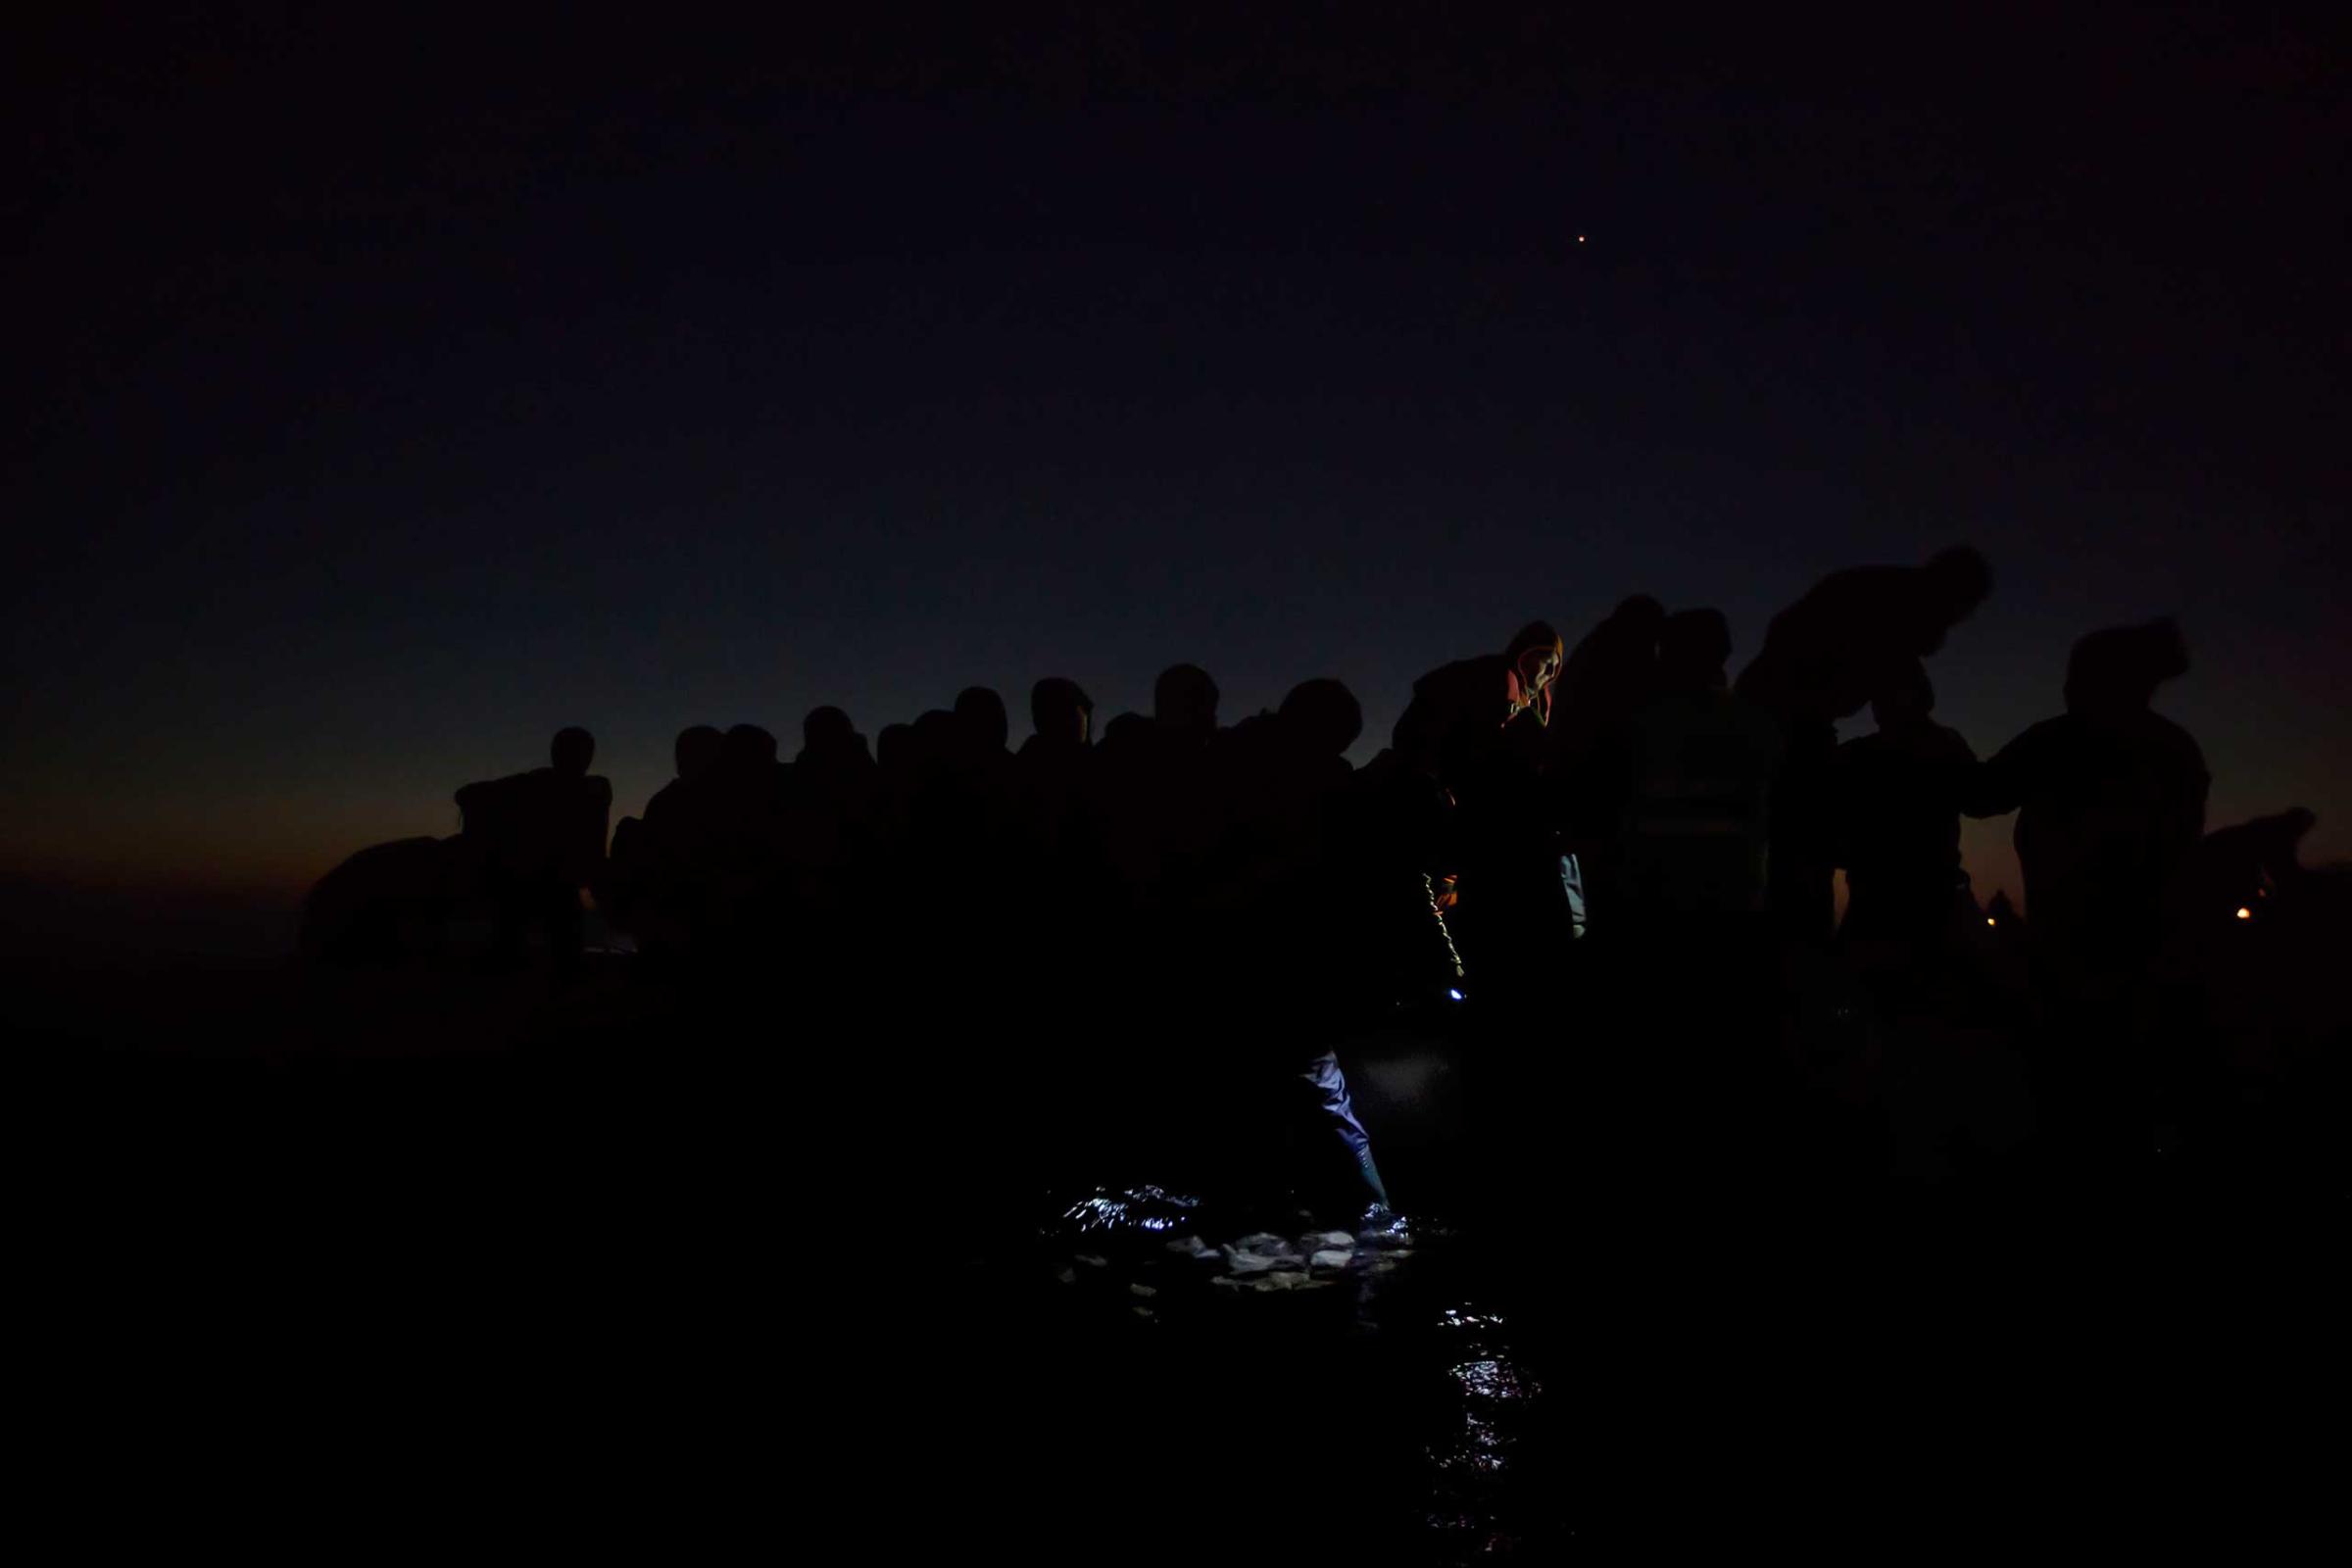 General News, 2nd prize singles. Refugees travel in darkness through Europe to avoid detection; Lesbos, Greece, Dec. 6, 2015.